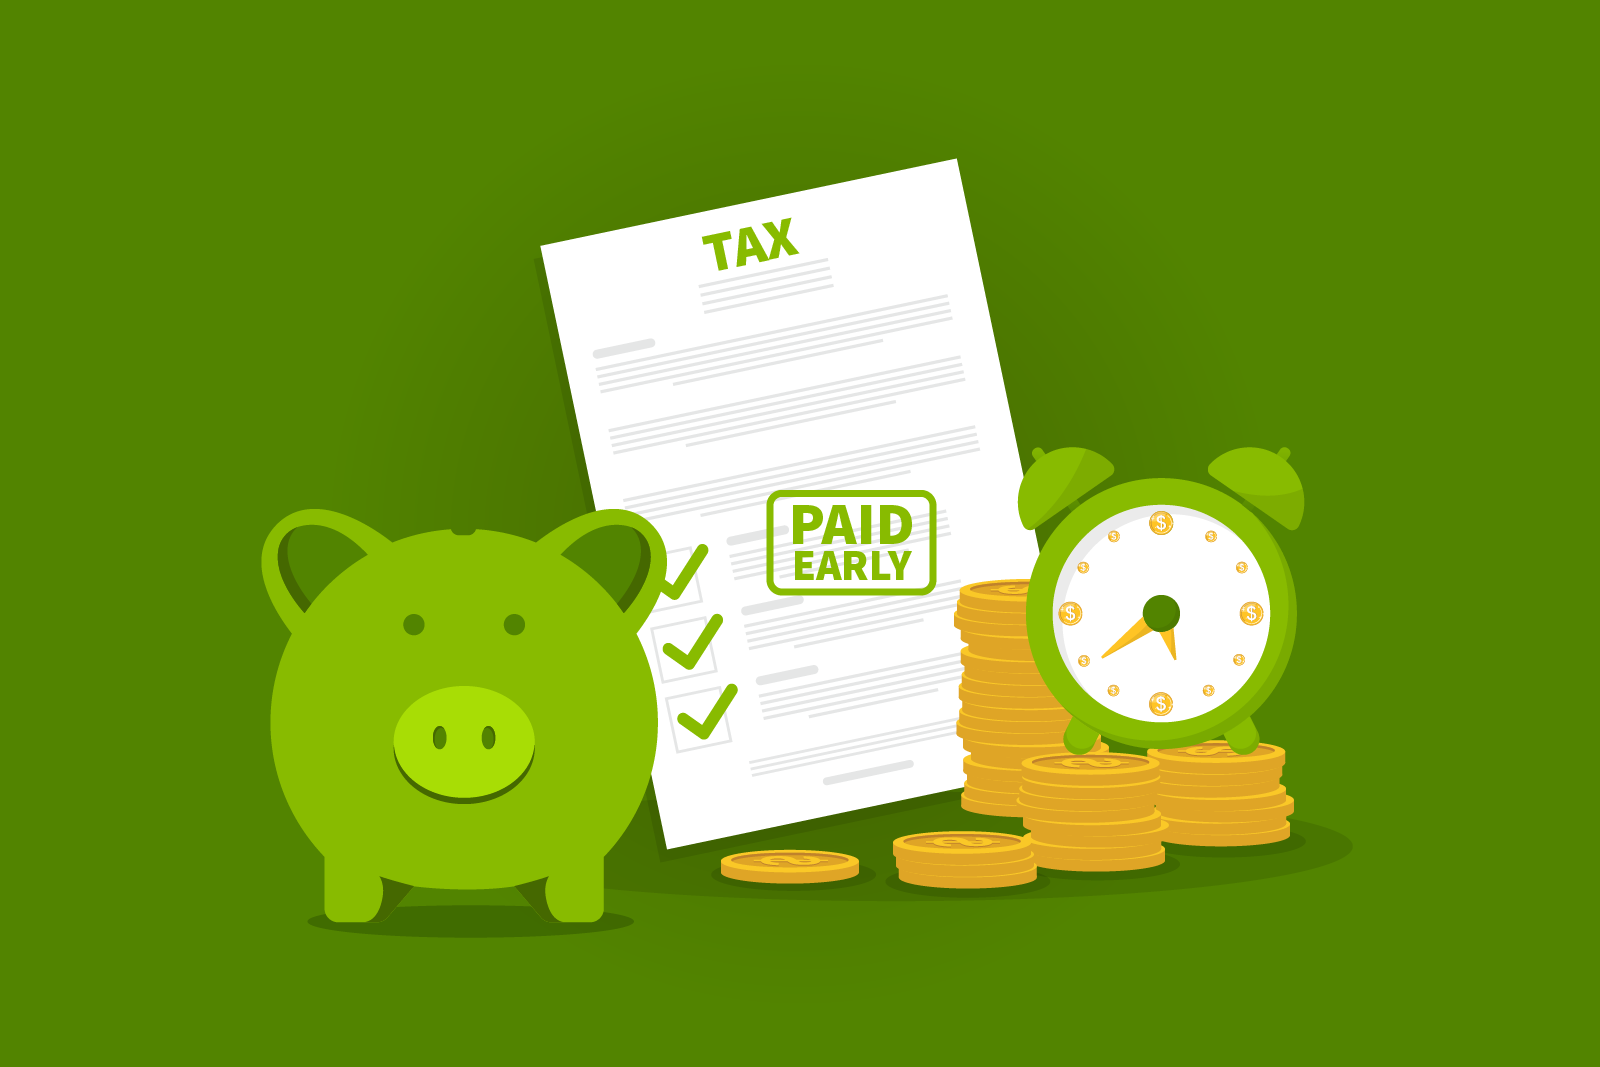 Early Pay Tax illustration